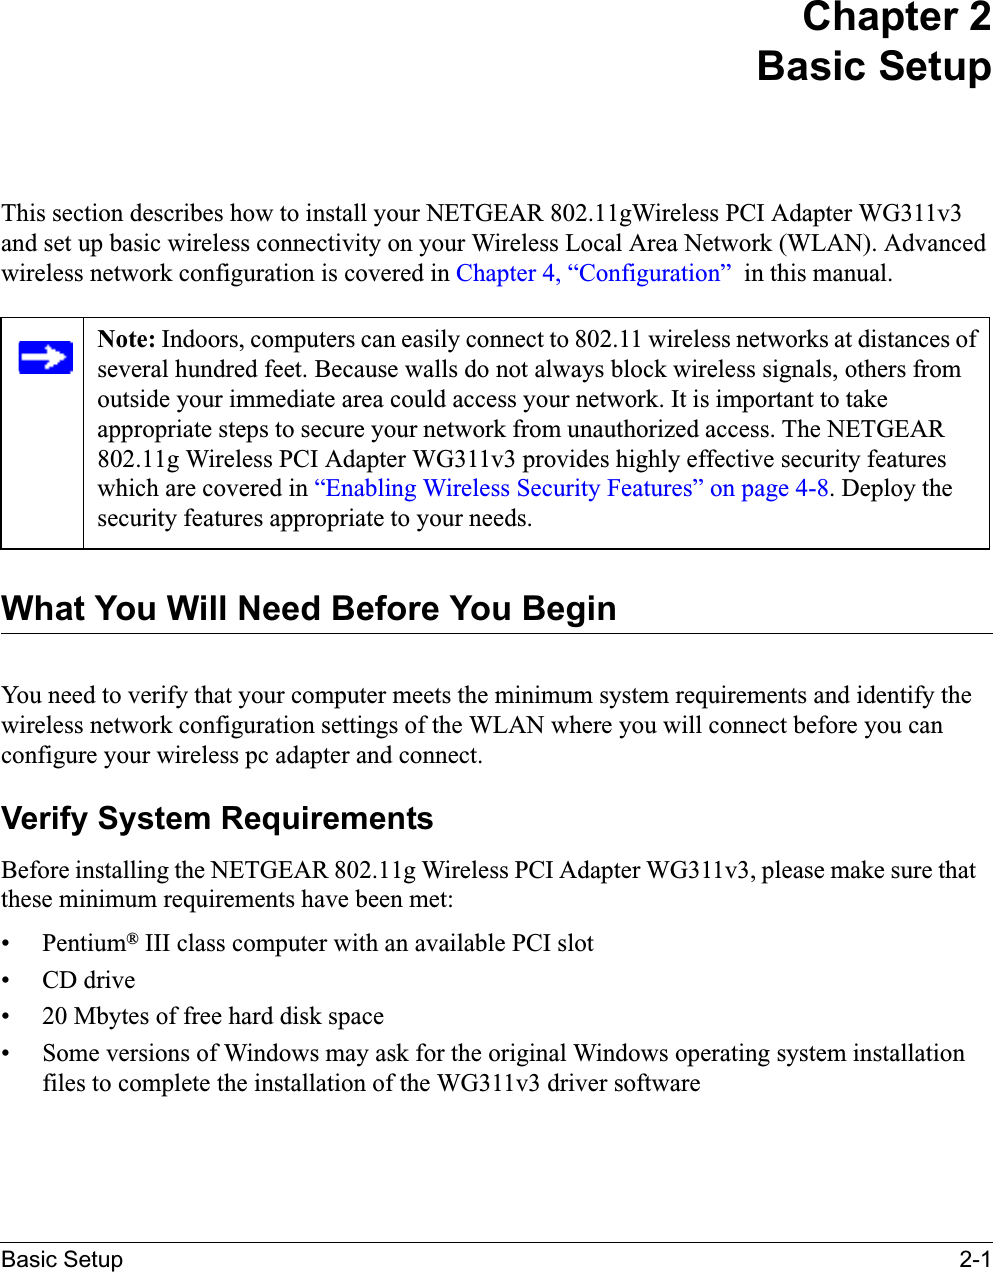 Basic Setup 2-1Chapter 2Basic SetupThis section describes how to install your NETGEAR 802.11gWireless PCI Adapter WG311v3and set up basic wireless connectivity on your Wireless Local Area Network (WLAN). Advanced wireless network configuration is covered in Chapter 4, “Configuration”  in this manual.What You Will Need Before You BeginYou need to verify that your computer meets the minimum system requirements and identify the wireless network configuration settings of the WLAN where you will connect before you can configure your wireless pc adapter and connect. Verify System RequirementsBefore installing the NETGEAR 802.11g Wireless PCI Adapter WG311v3, please make sure thatthese minimum requirements have been met:• Pentium® III class computer with an available PCI slot• CD drive• 20 Mbytes of free hard disk space• Some versions of Windows may ask for the original Windows operating system installation files to complete the installation of the WG311v3 driver softwareNote: Indoors, computers can easily connect to 802.11 wireless networks at distances of several hundred feet. Because walls do not always block wireless signals, others from outside your immediate area could access your network. It is important to take appropriate steps to secure your network from unauthorized access. The NETGEAR802.11g Wireless PCI Adapter WG311v3 provides highly effective security features which are covered in “Enabling Wireless Security Features” on page 4-8. Deploy the security features appropriate to your needs.